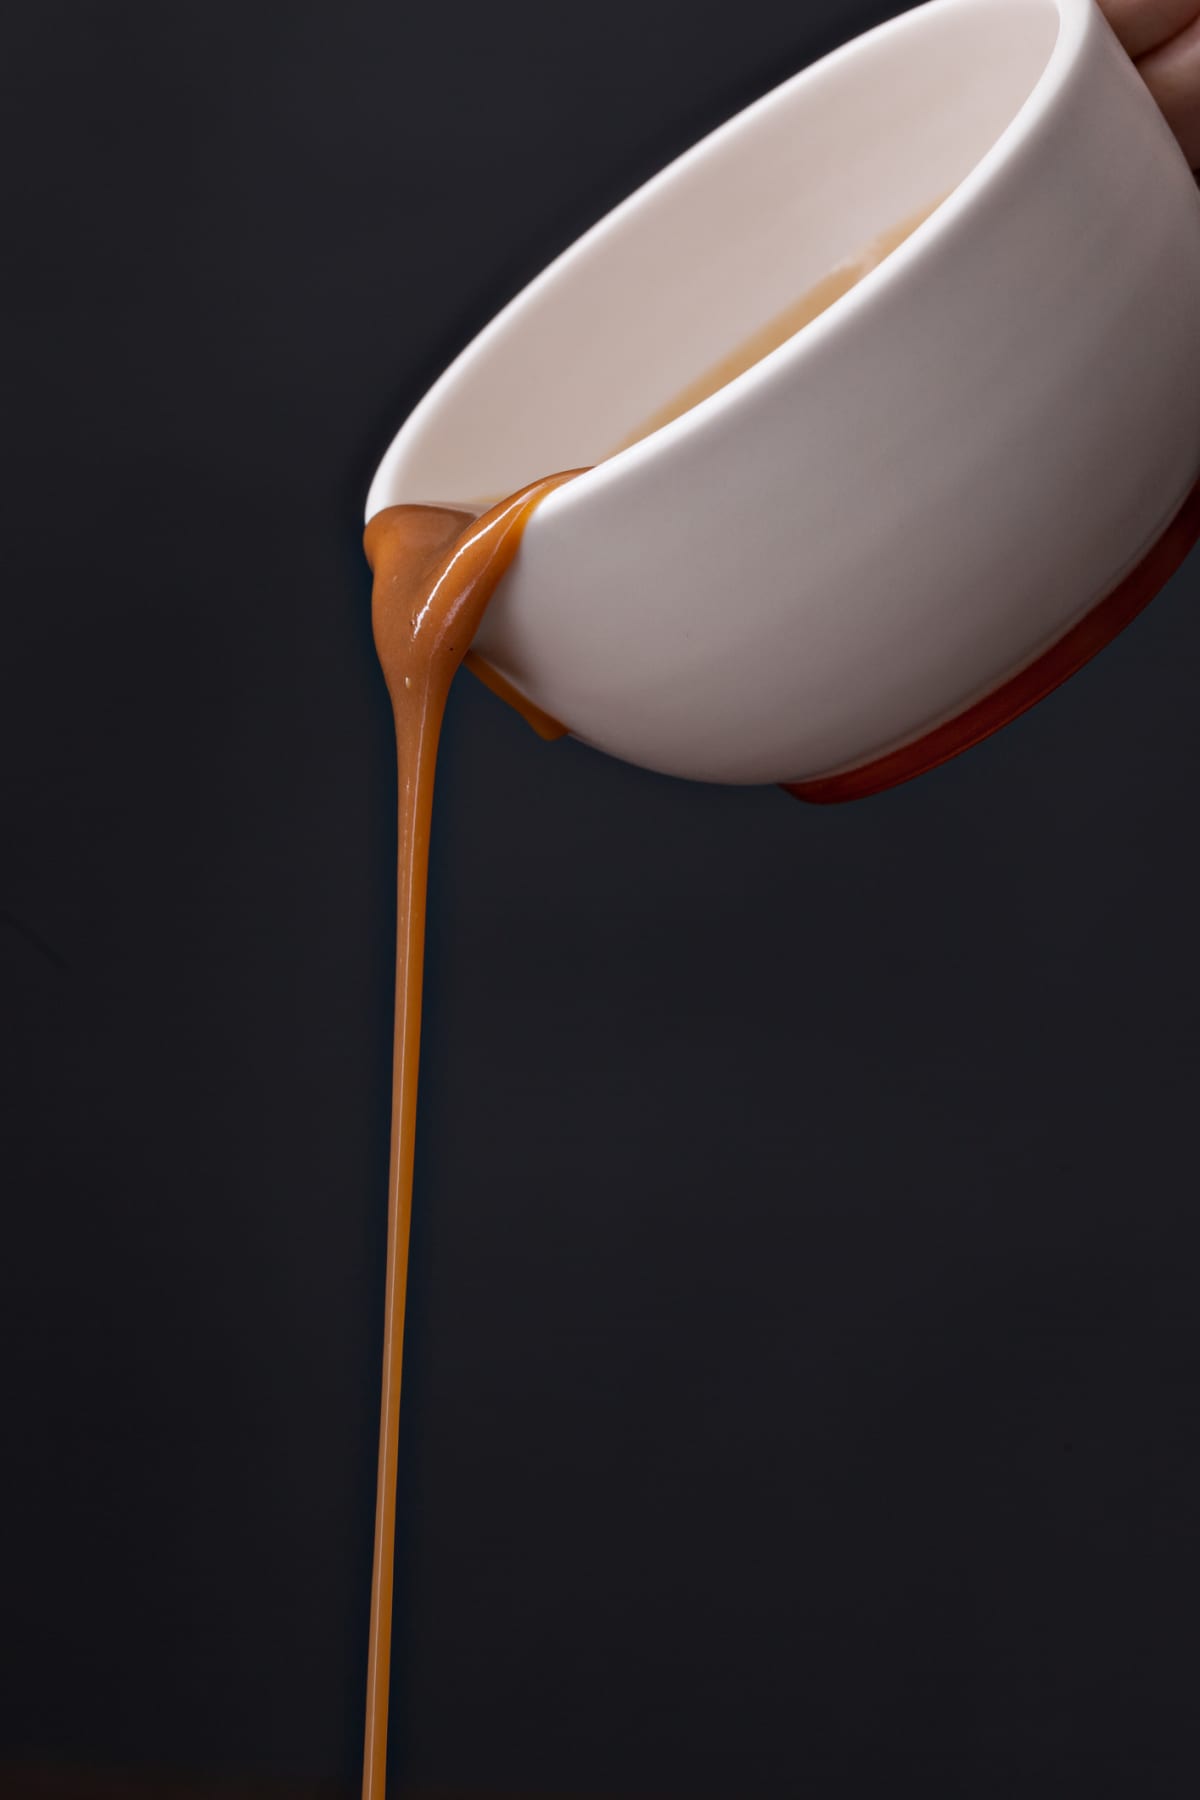 A bowl of gravy being poured